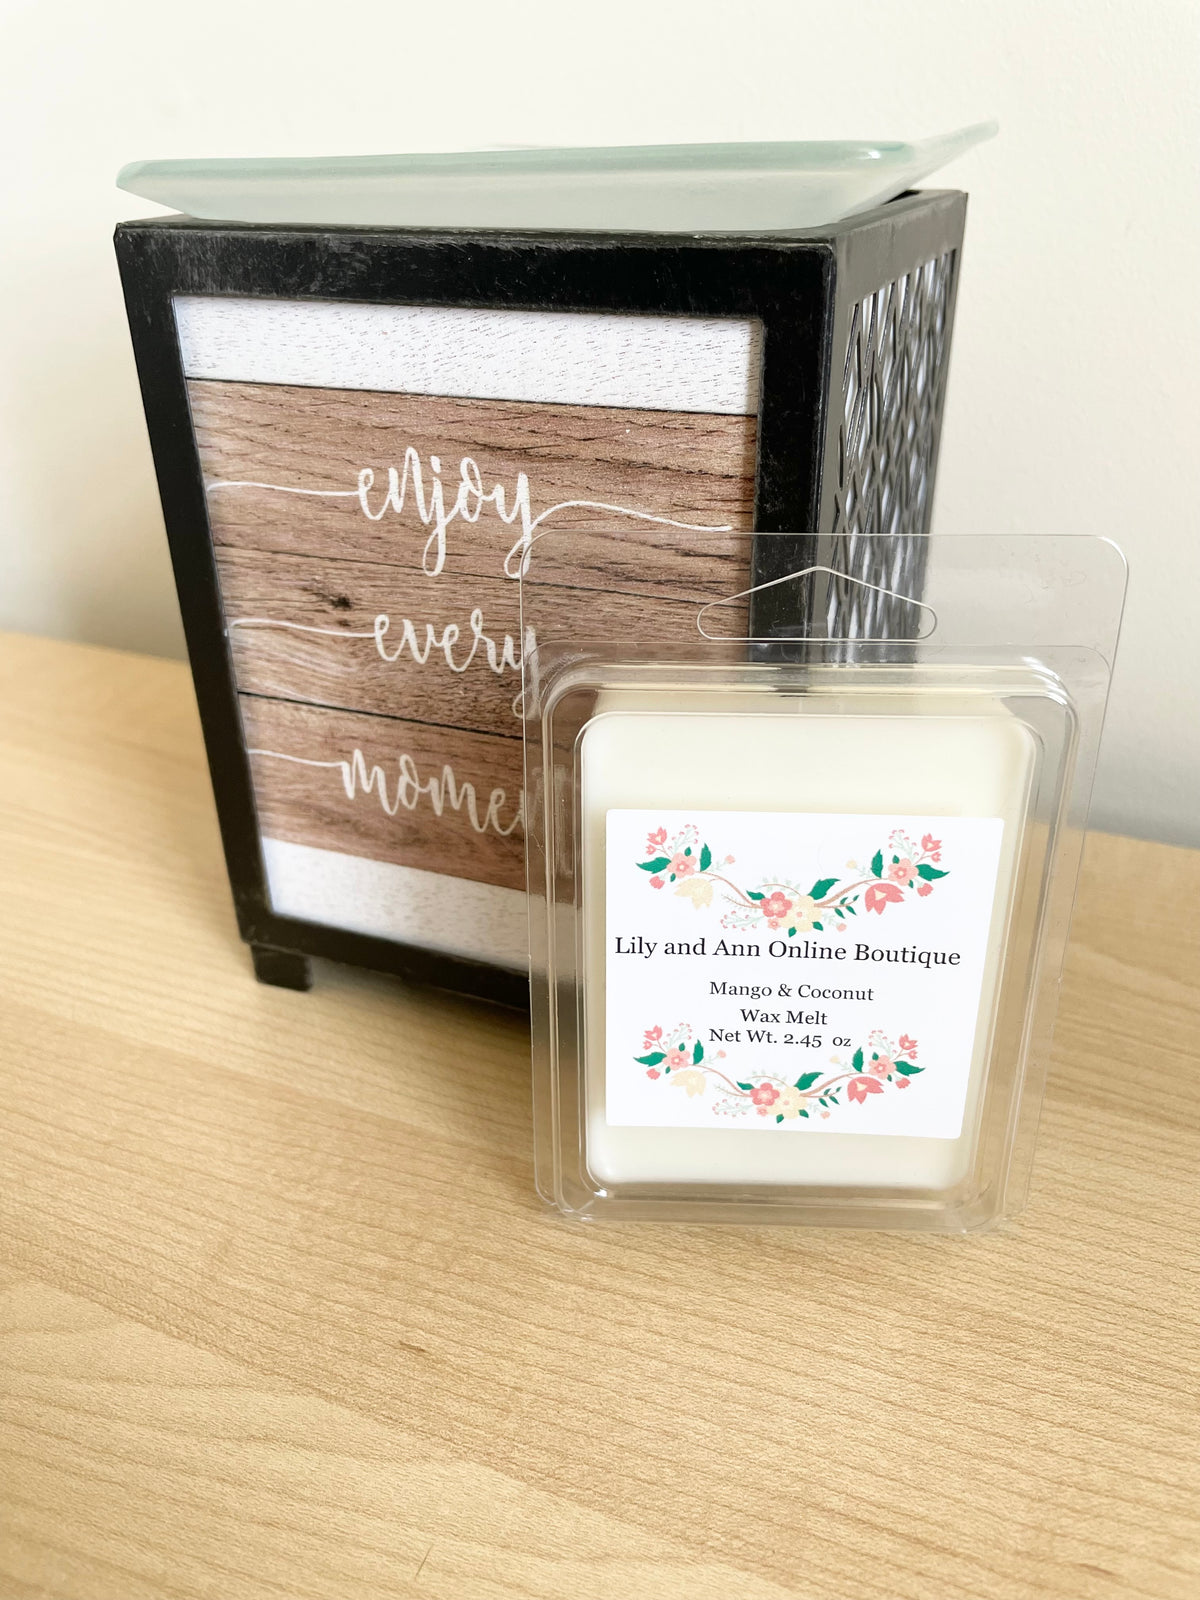 Mango & Coconut Wax Melt - Lily And Ann Online Boutique